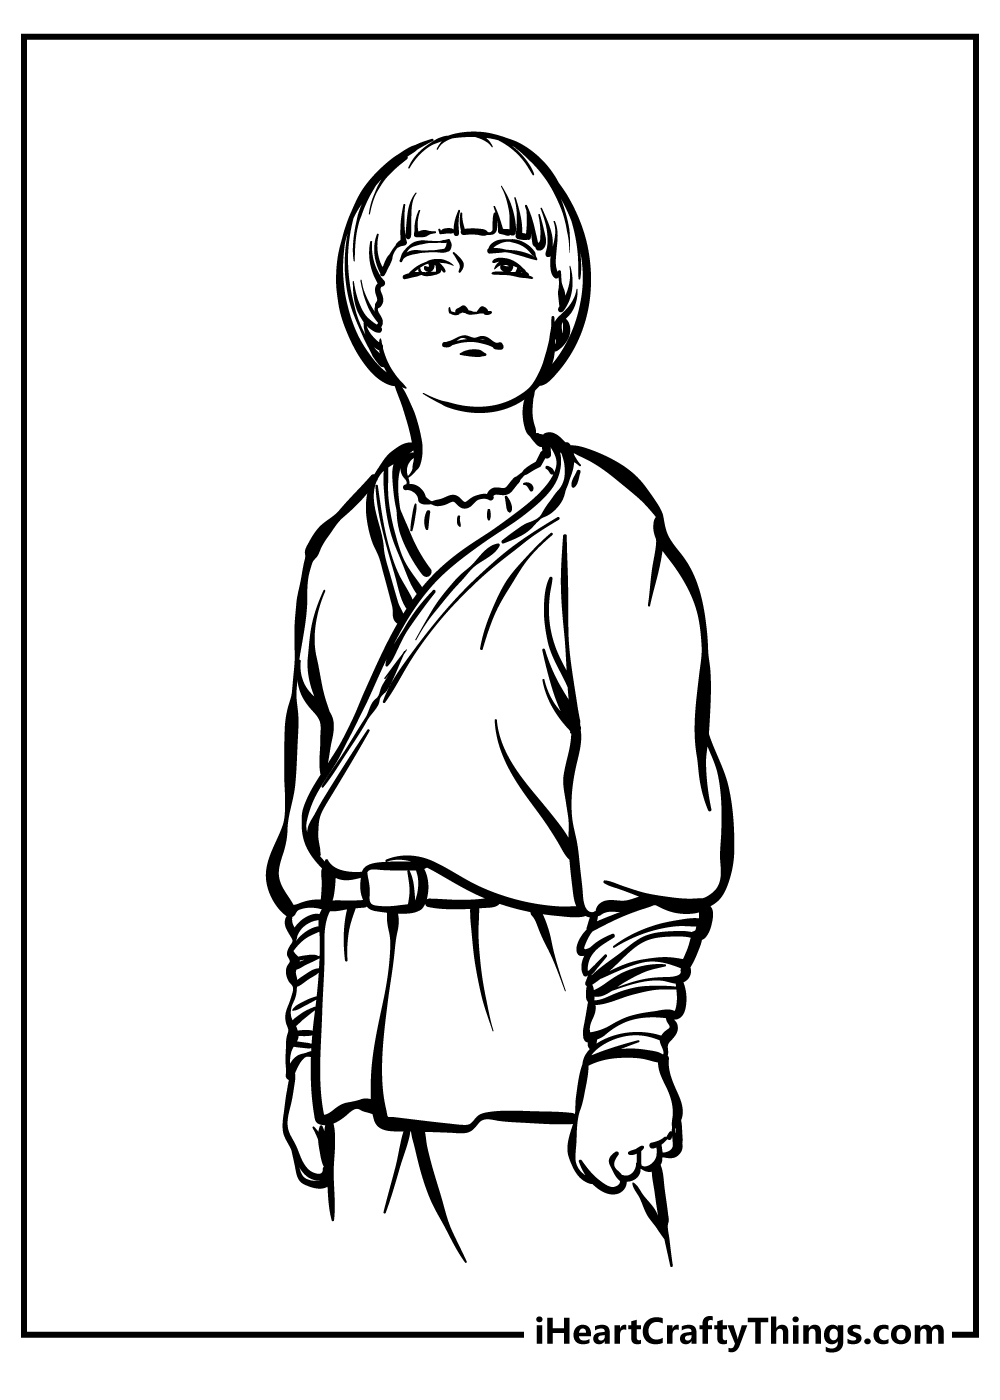 Star Wars Coloring Pages for kids free download